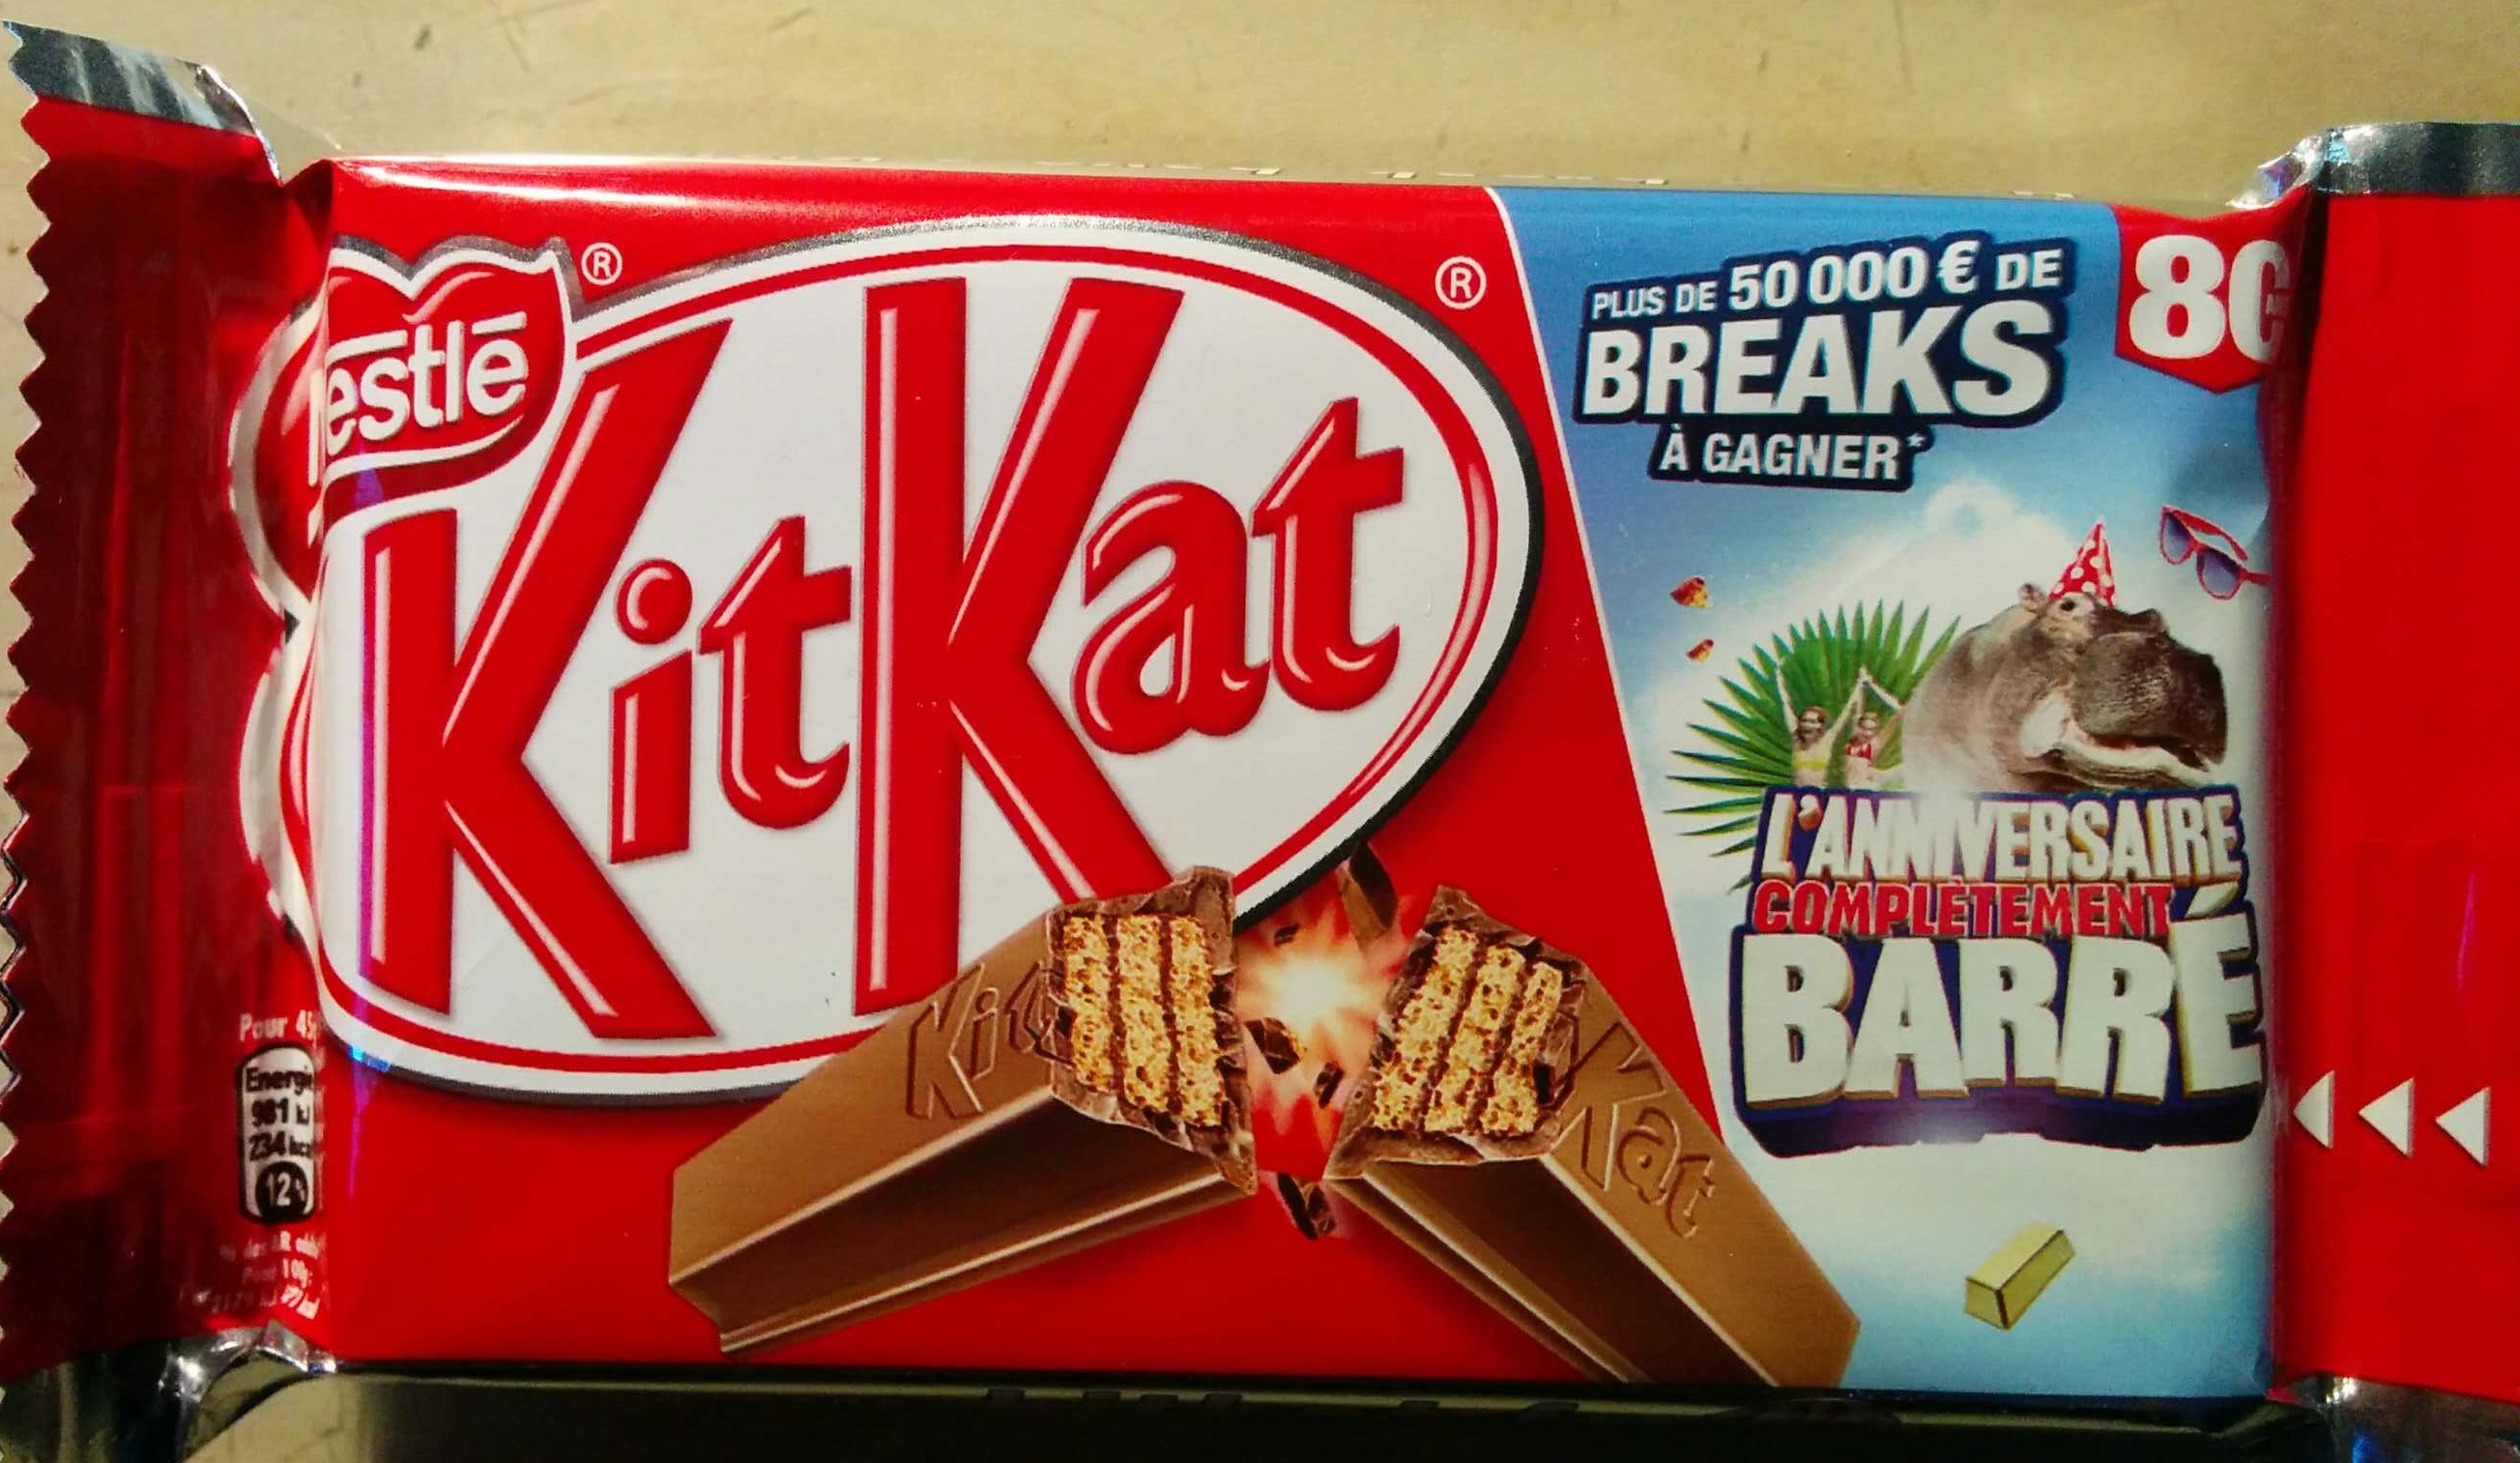 Pictures of kit kat